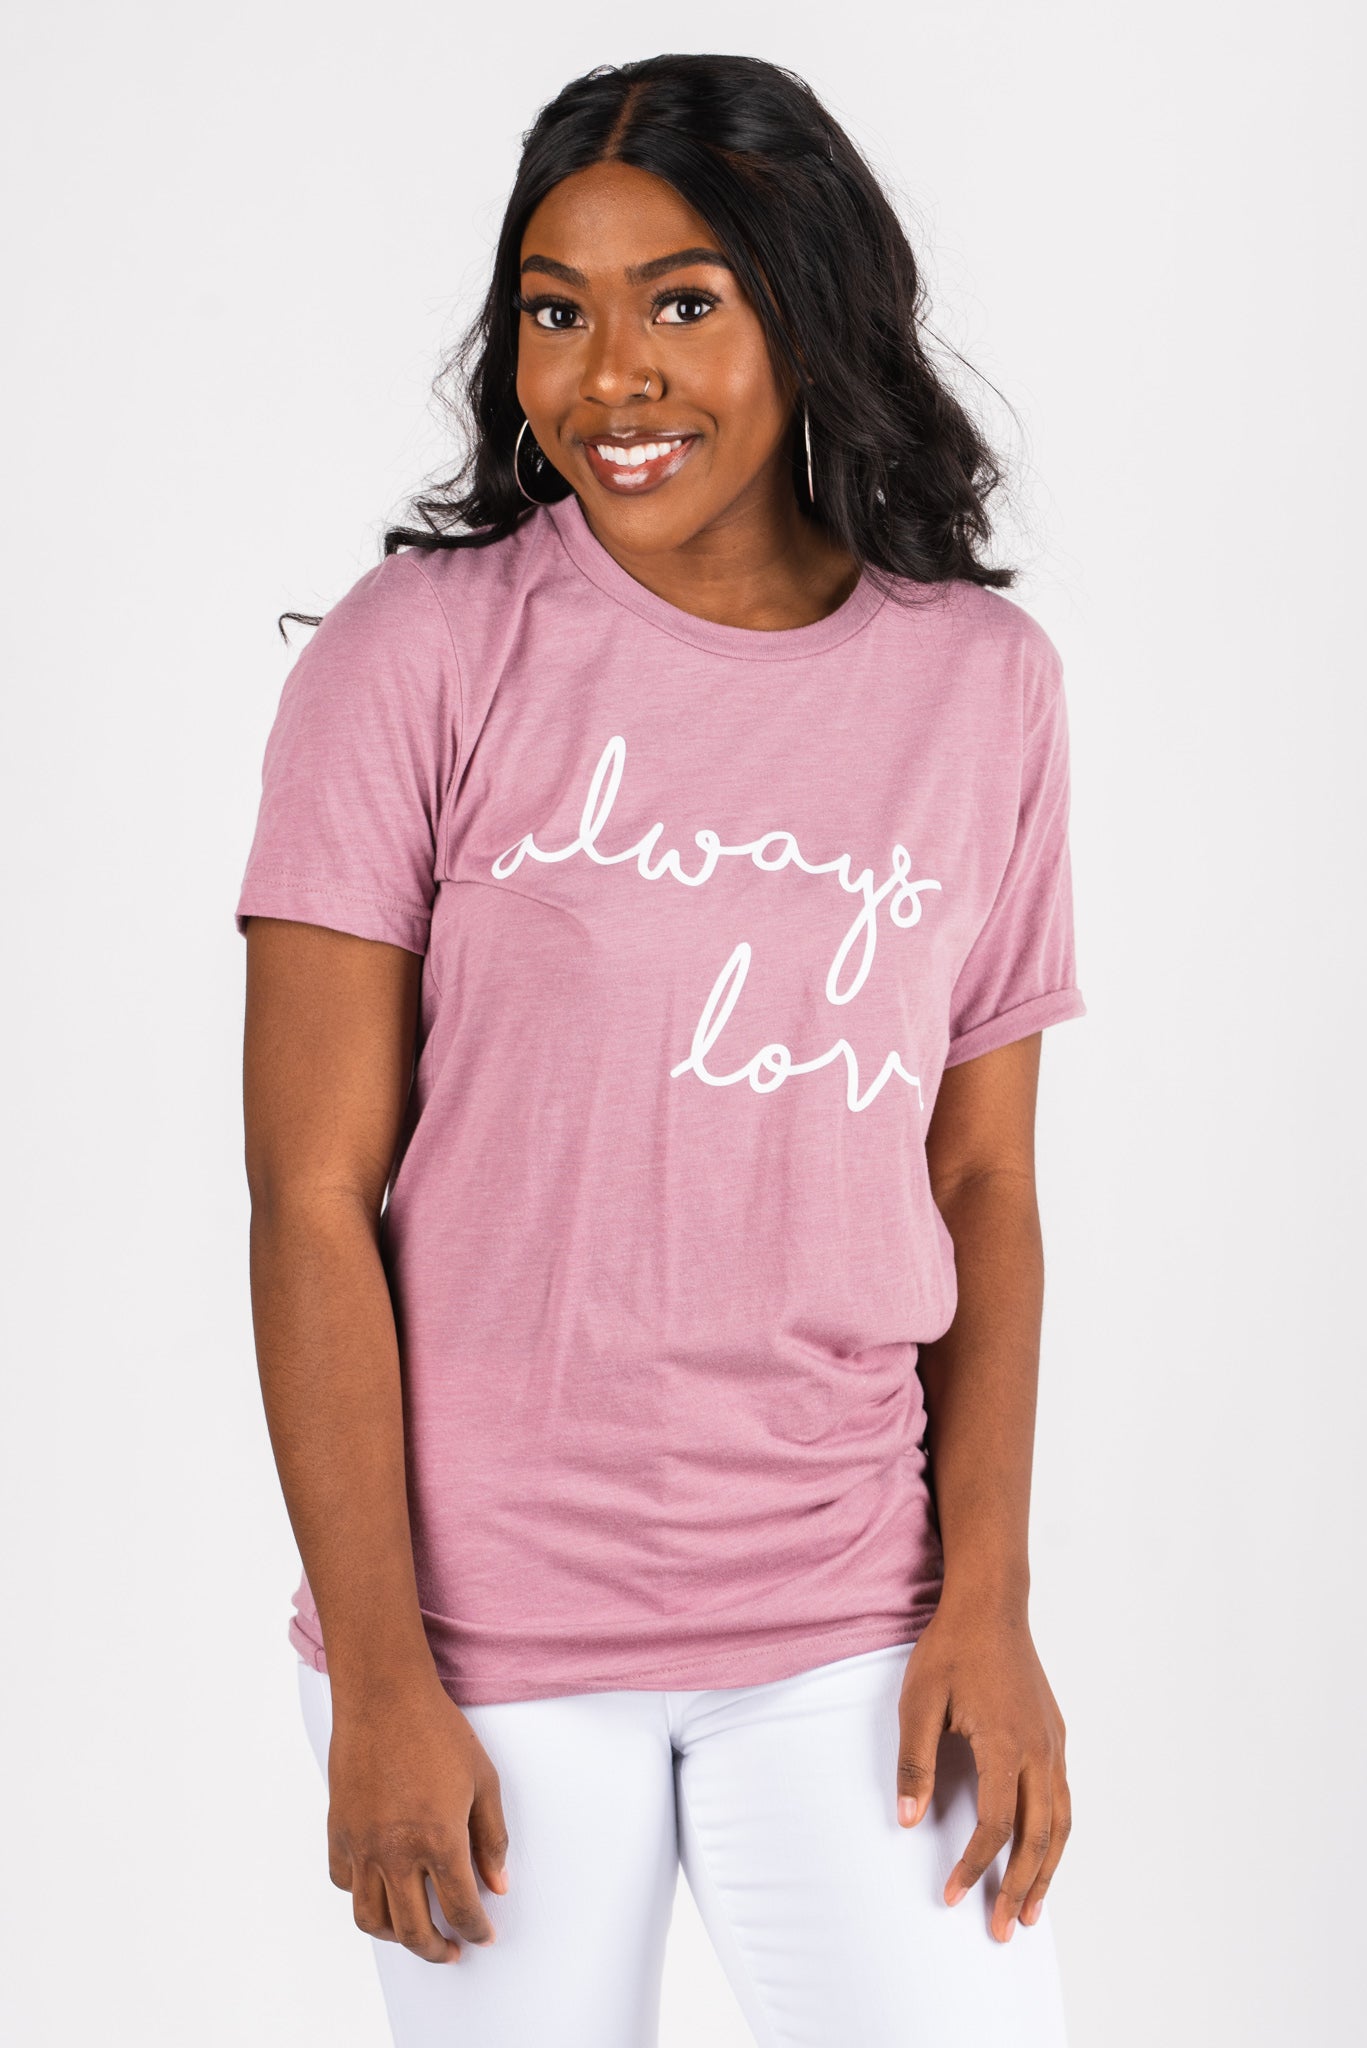 Always Love unisex short sleeve crew neck t-shirt orchid - Stylish T-shirts - Trendy Graphic T-Shirts and Tank Tops at Lush Fashion Lounge Boutique in Oklahoma City